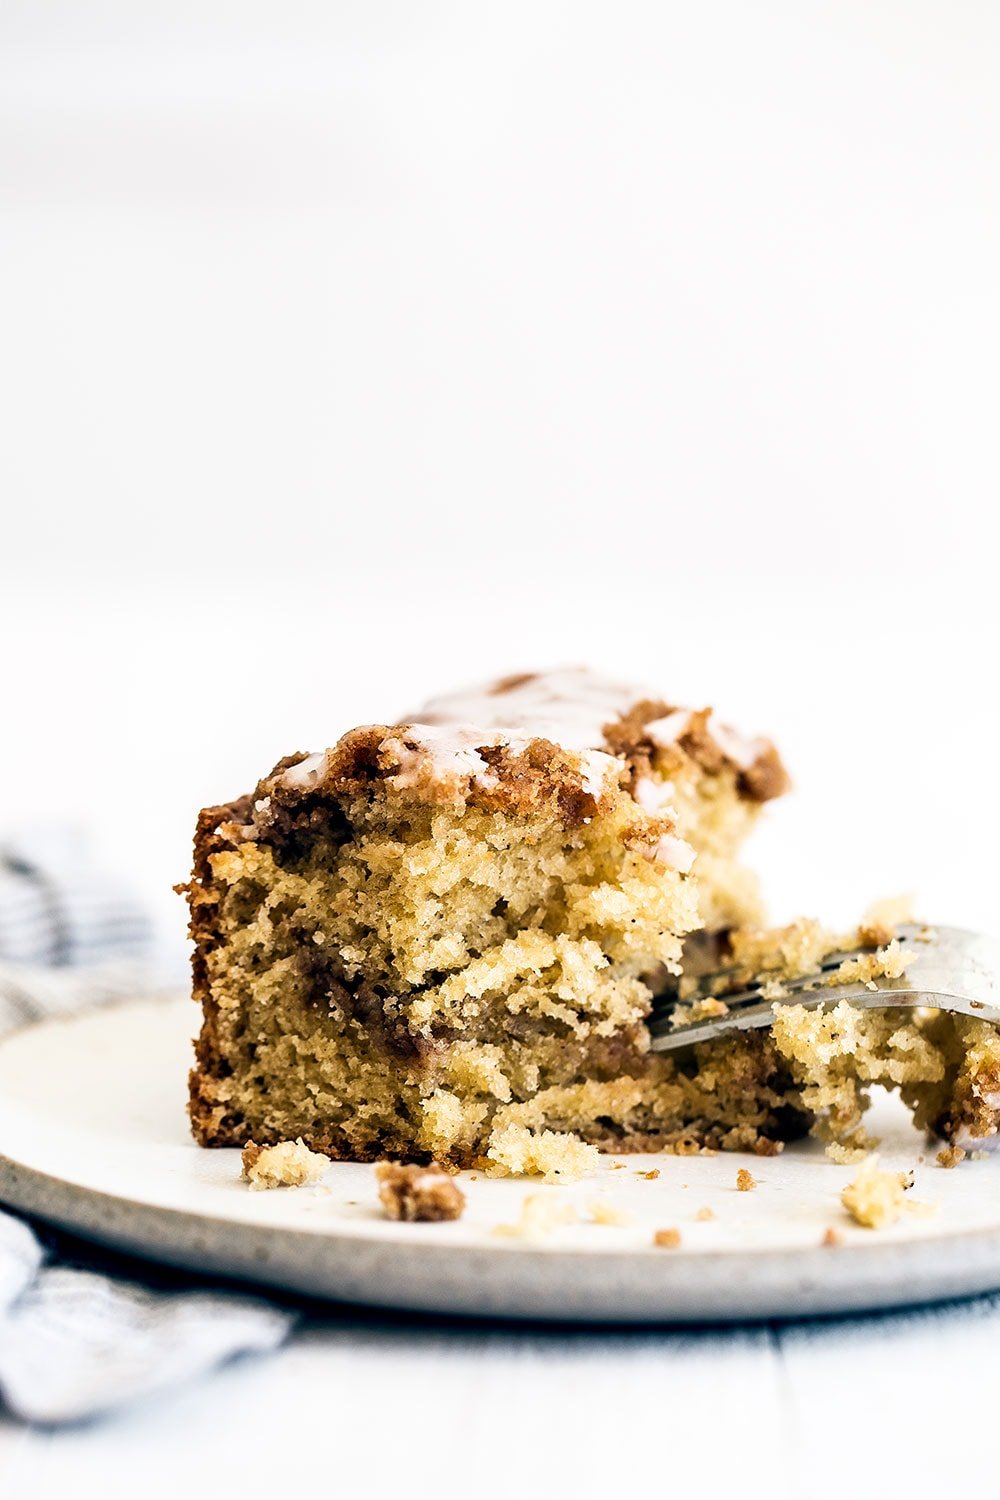 Browned butter sour cream coffee cake with cinnamon streusel - the best coffee cake ever!